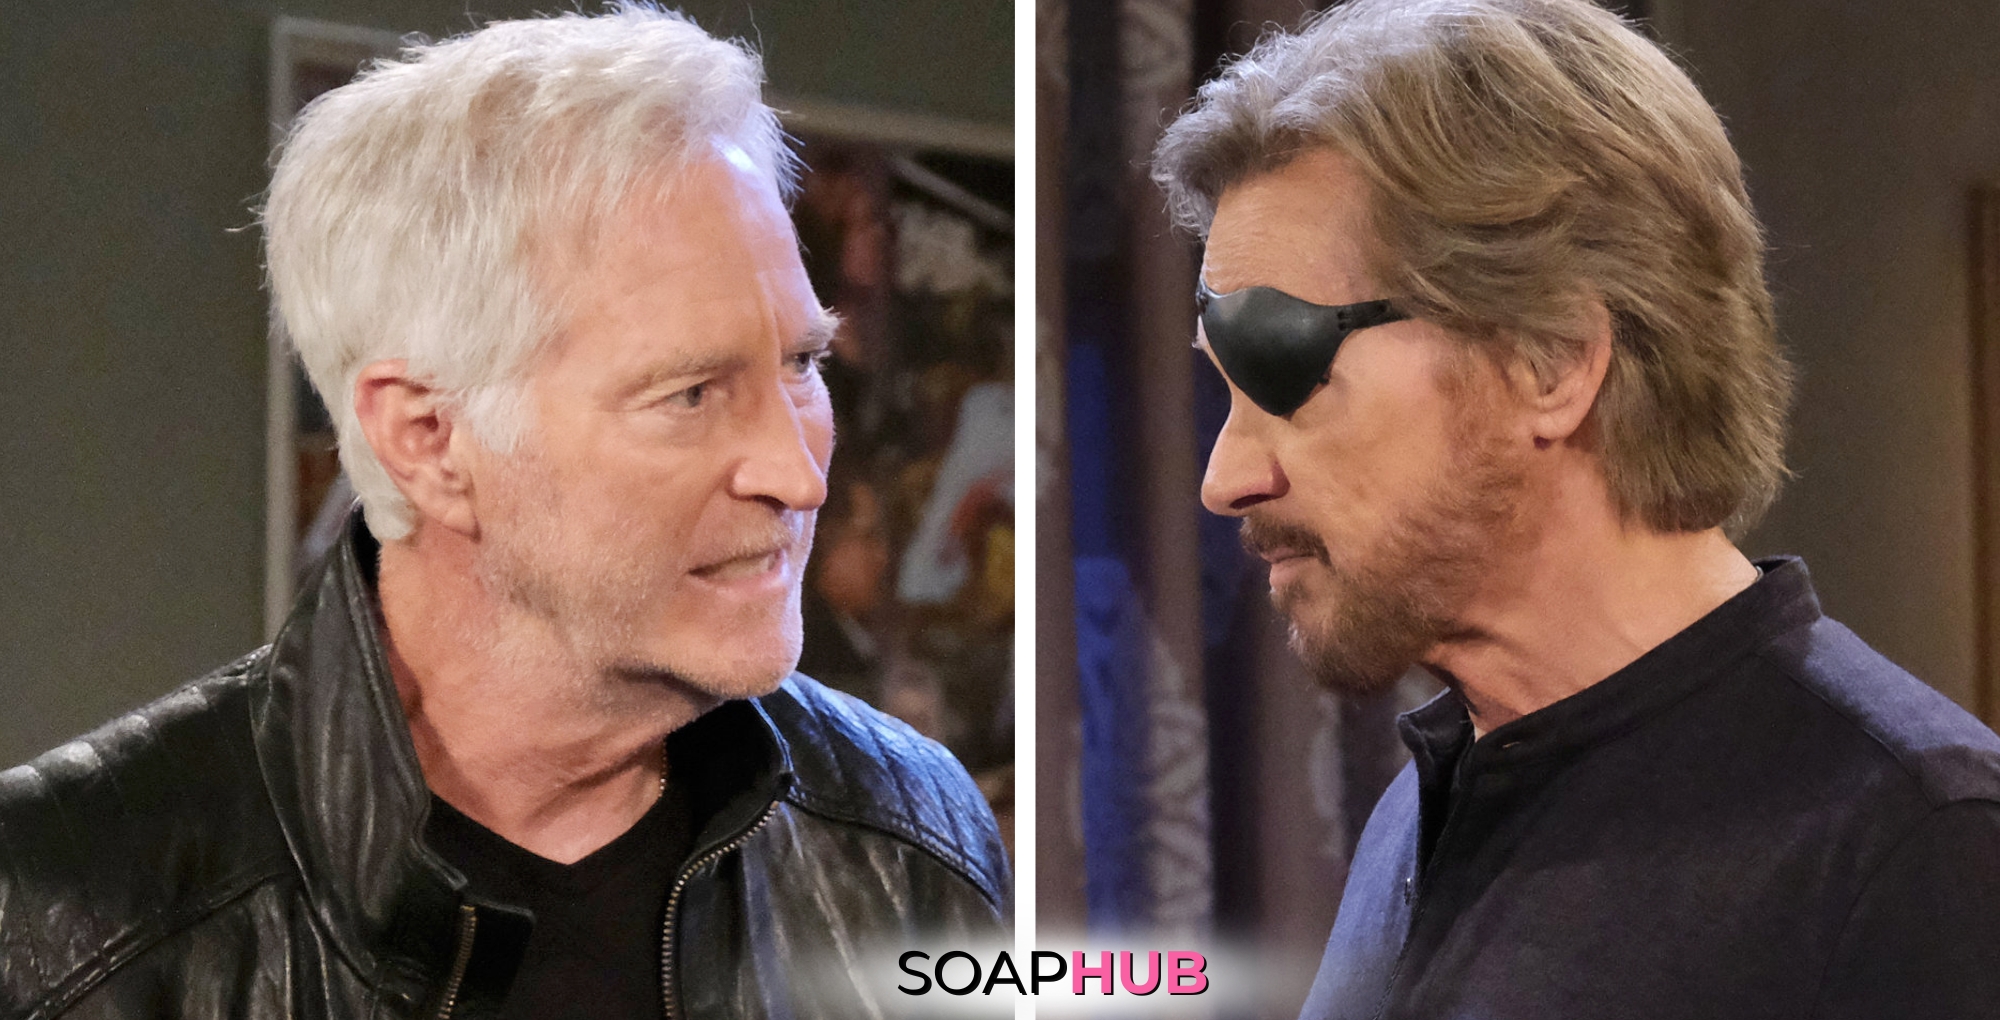 Days of our Lives spoilers for Friday, March 15 feature John and Steve with the Soap Hub logo across the bottom.